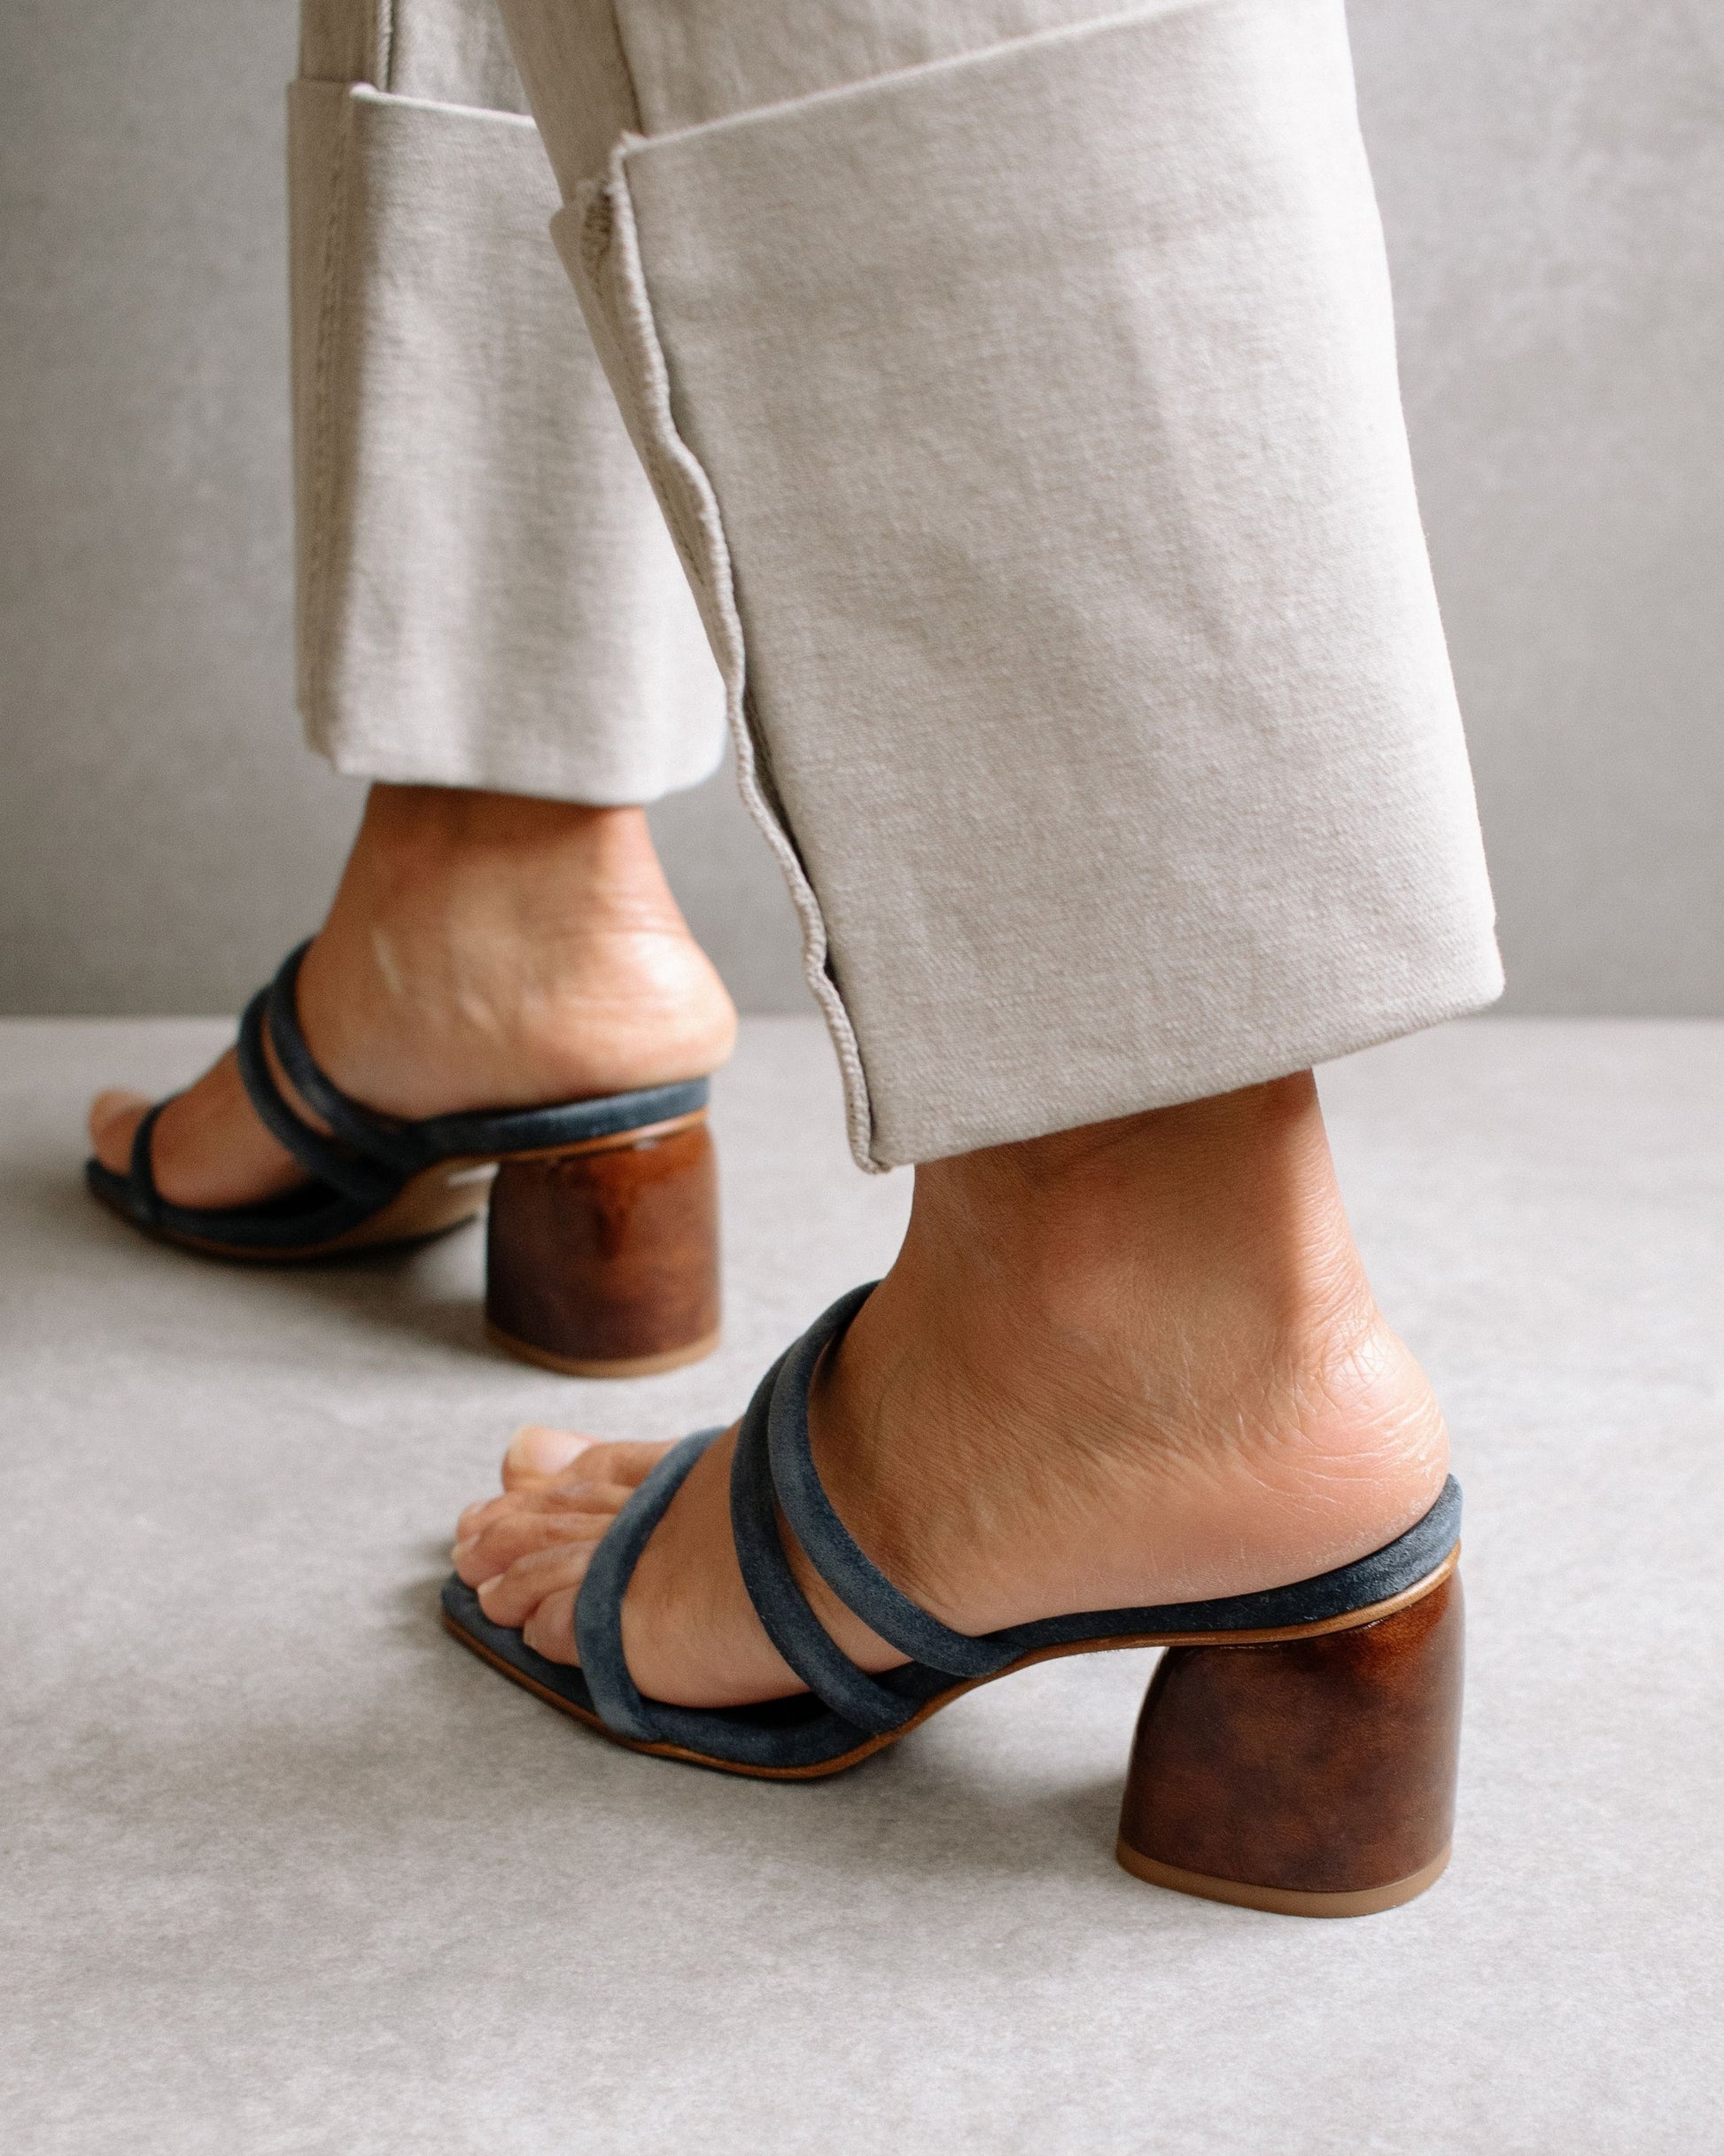 The Indiana Gray are the staple of the summer season. Defined by a minimalistic and timeless design, these suede sandals feature a curved block heel, one strap at the front and two parallel straps between the ankle and the instep, as well as a square toe for maximum flattery.